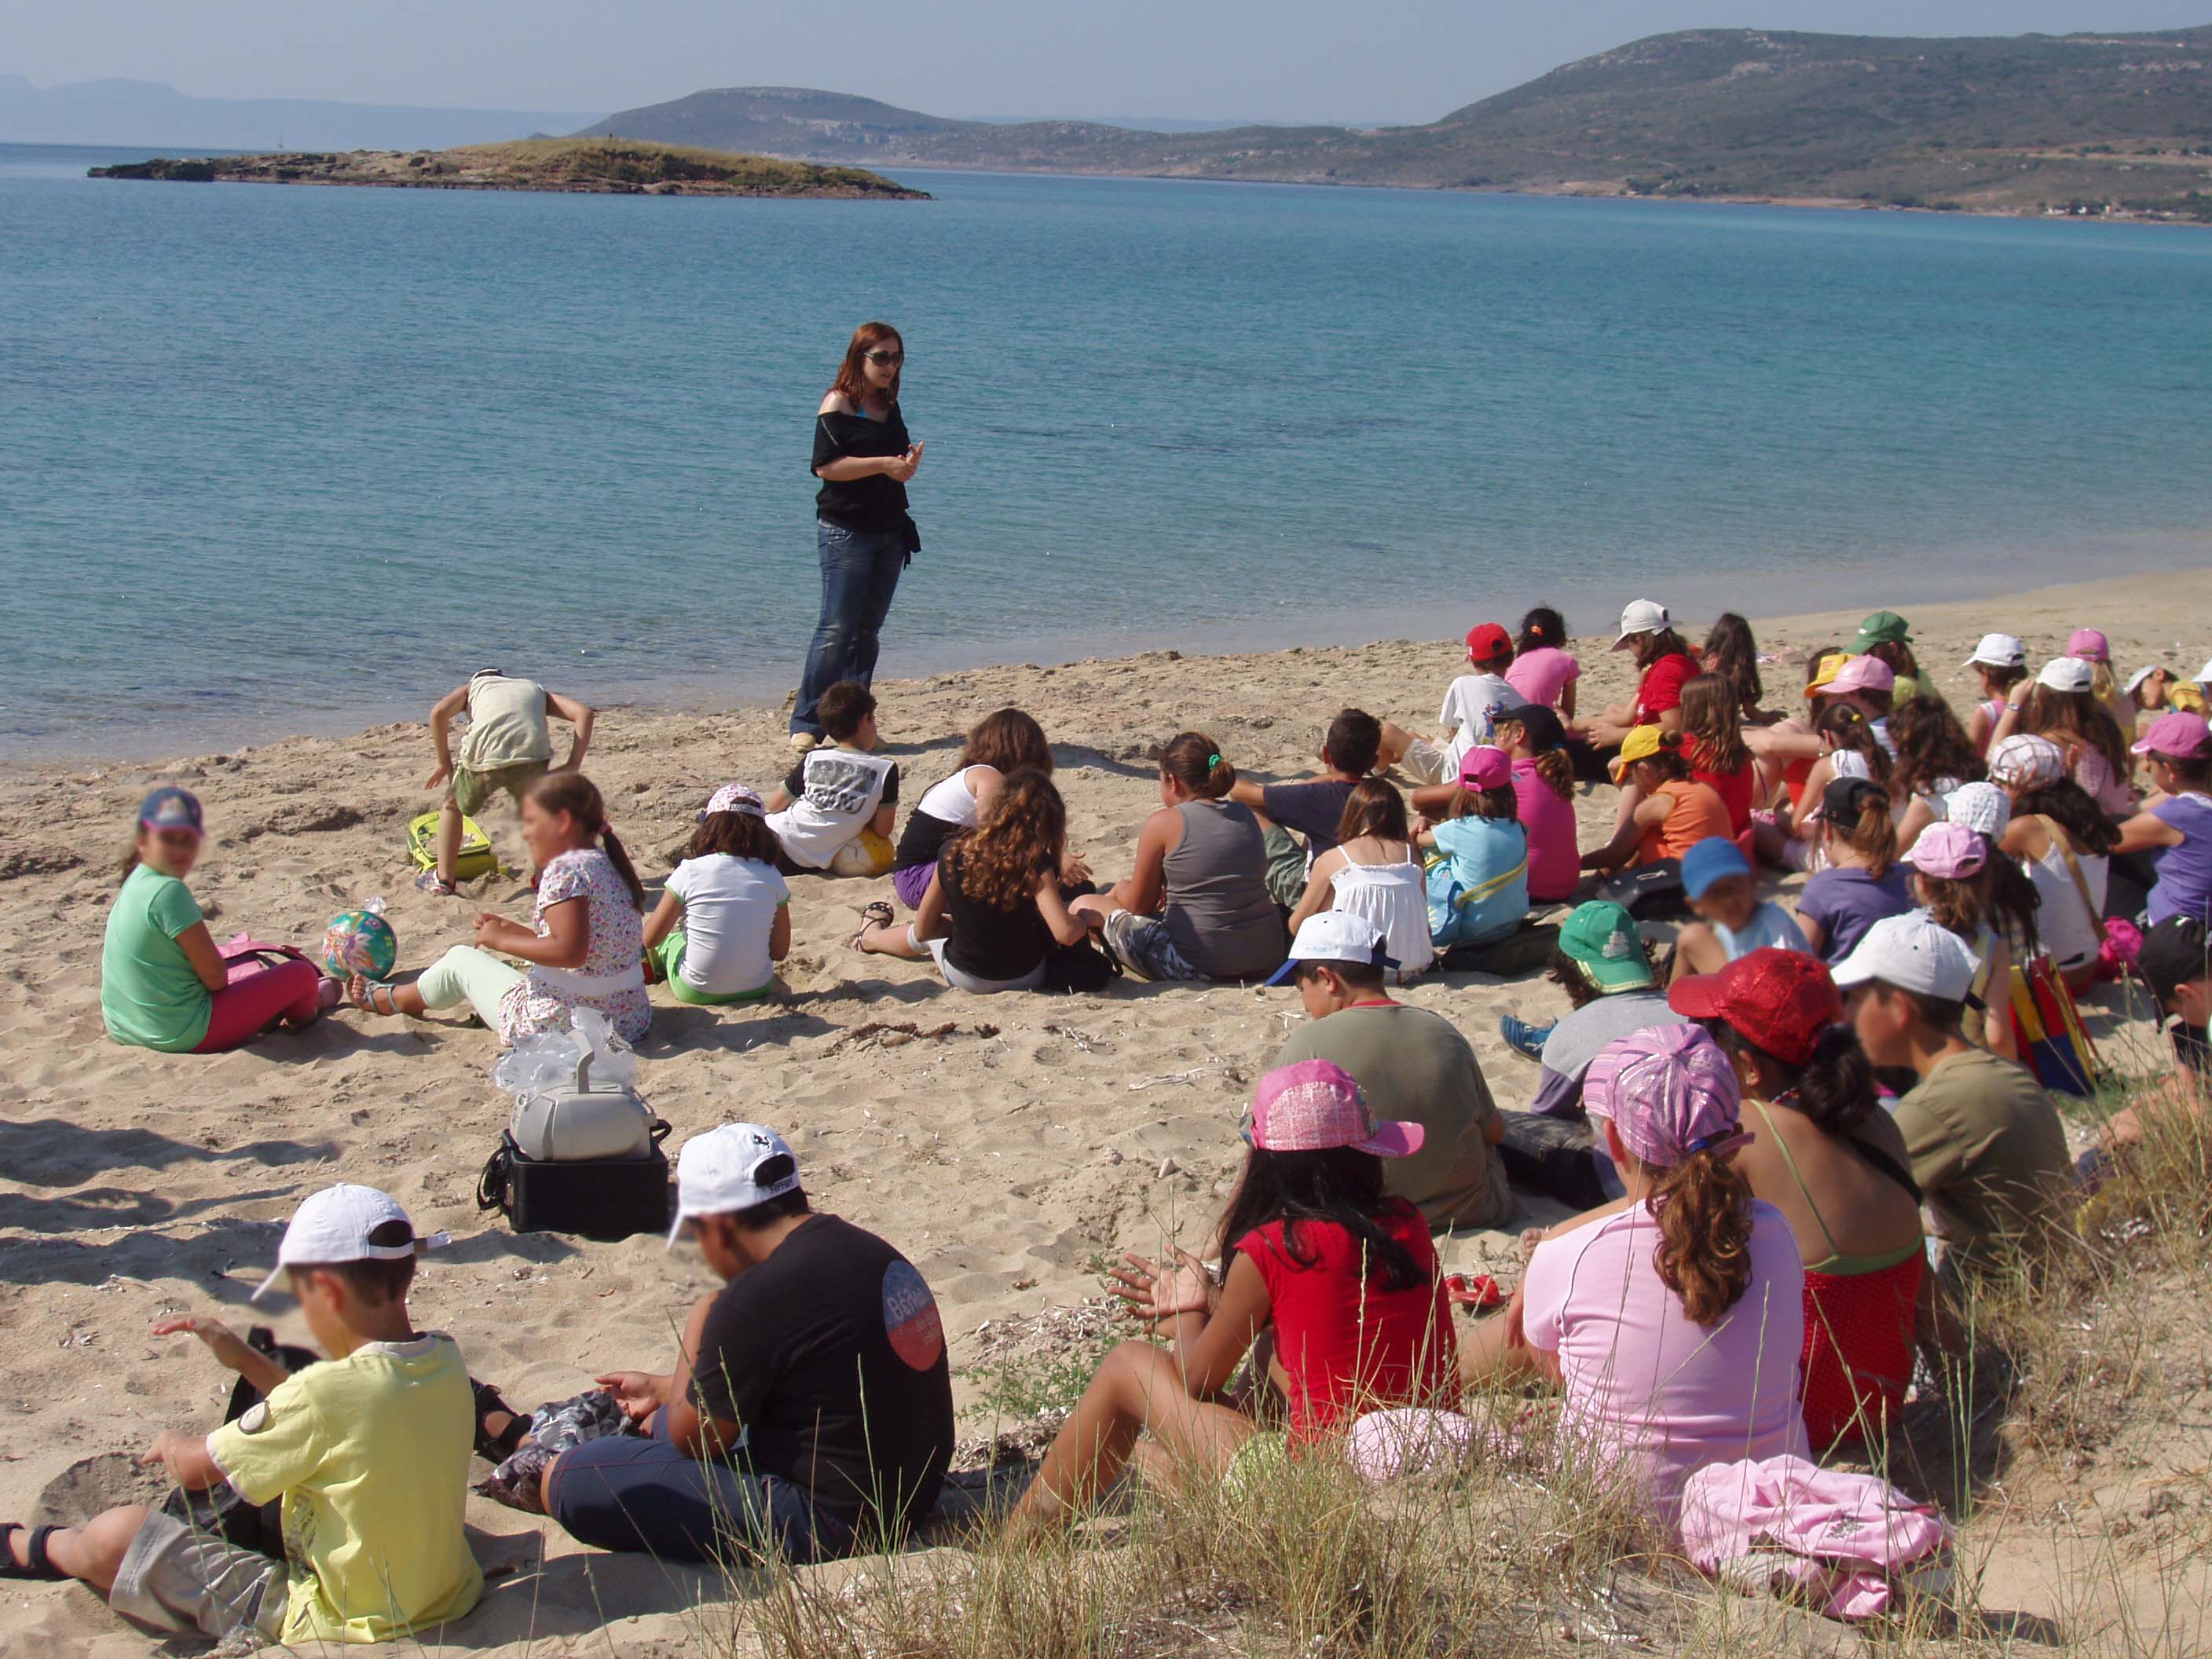 Image shows a large group of children seated on the beach listening to a woman who stands with her back to the ocean with several islands in the distance, beneath clear blue skies